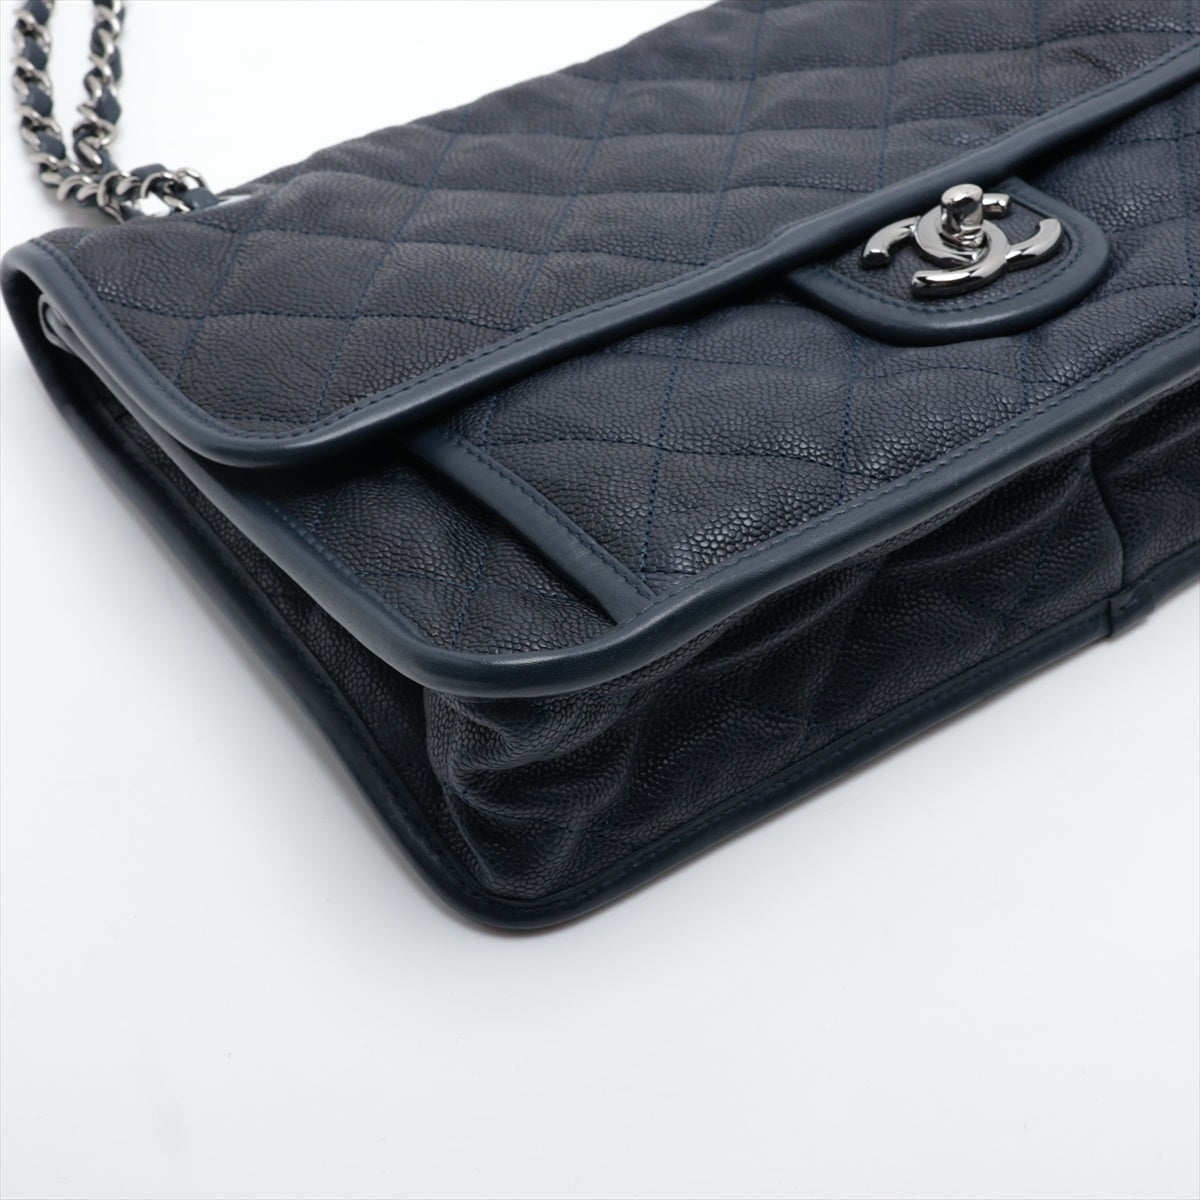 Chanel French Riviera Caviar Skin Single Flap Double Chain Bag Navy Blue Silver Metal Fittings 20XXXXXX